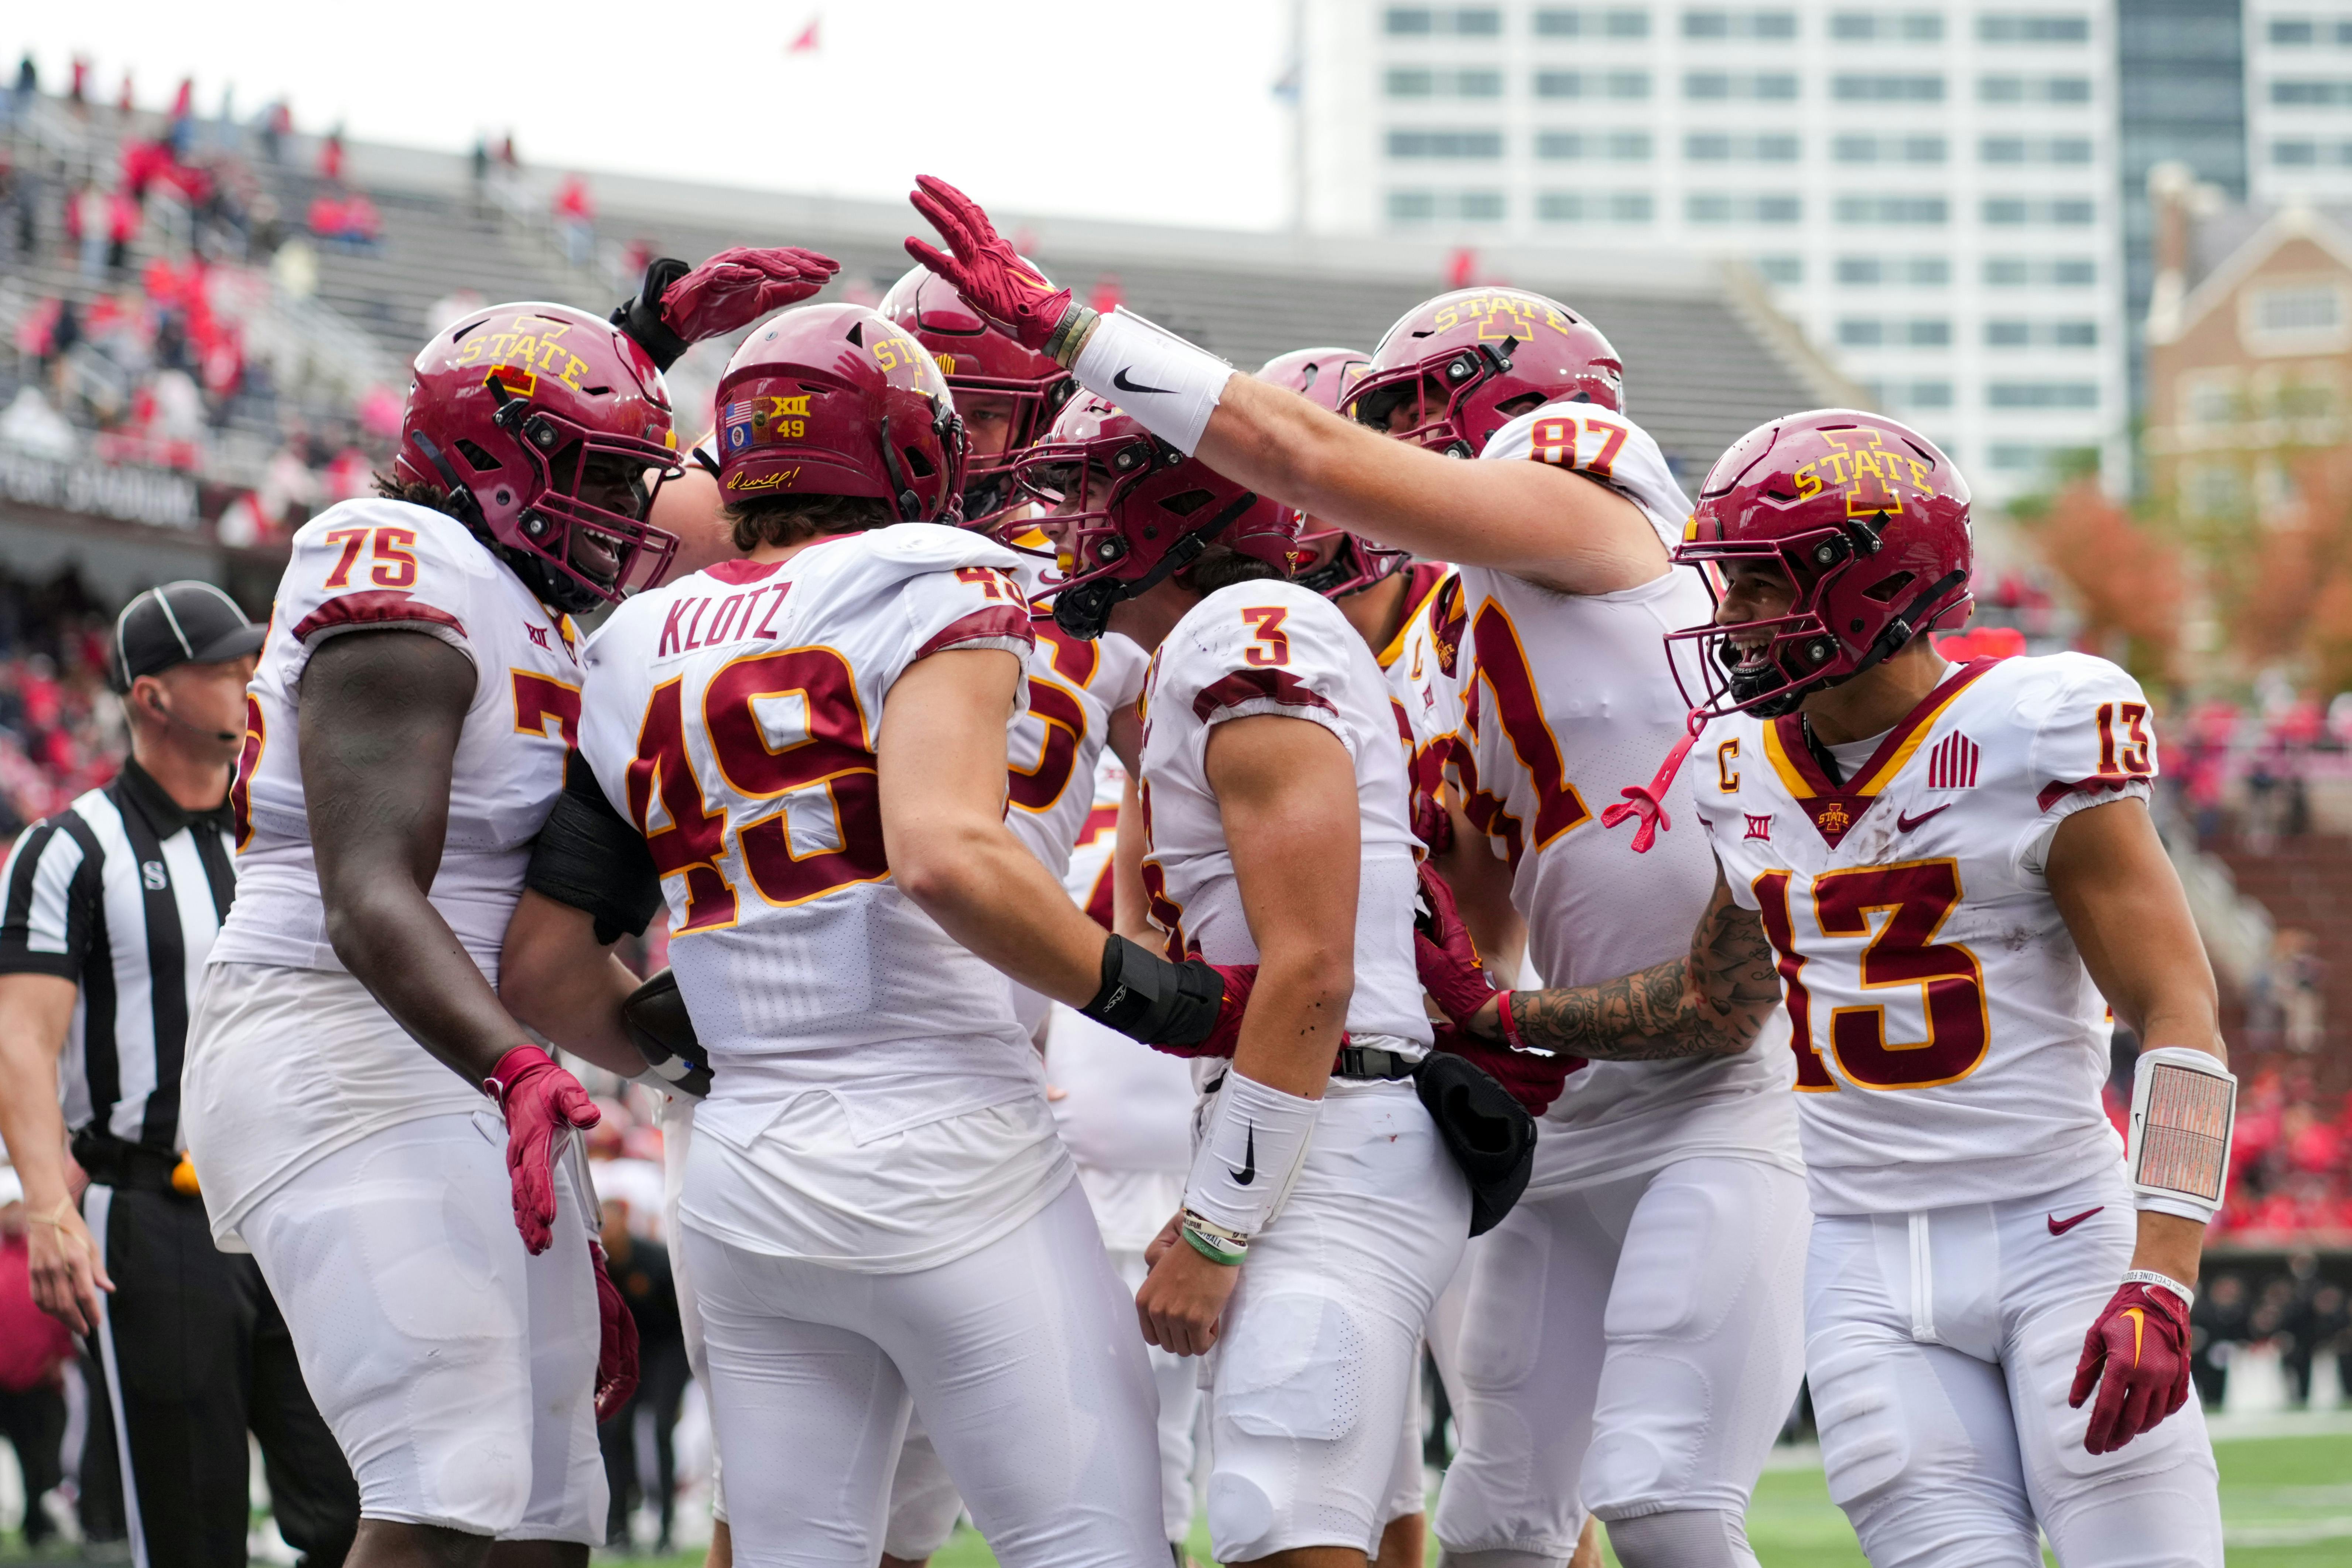 REACTION POD with CW: Cyclone dominate, jump to 3-1 in Big 12 play